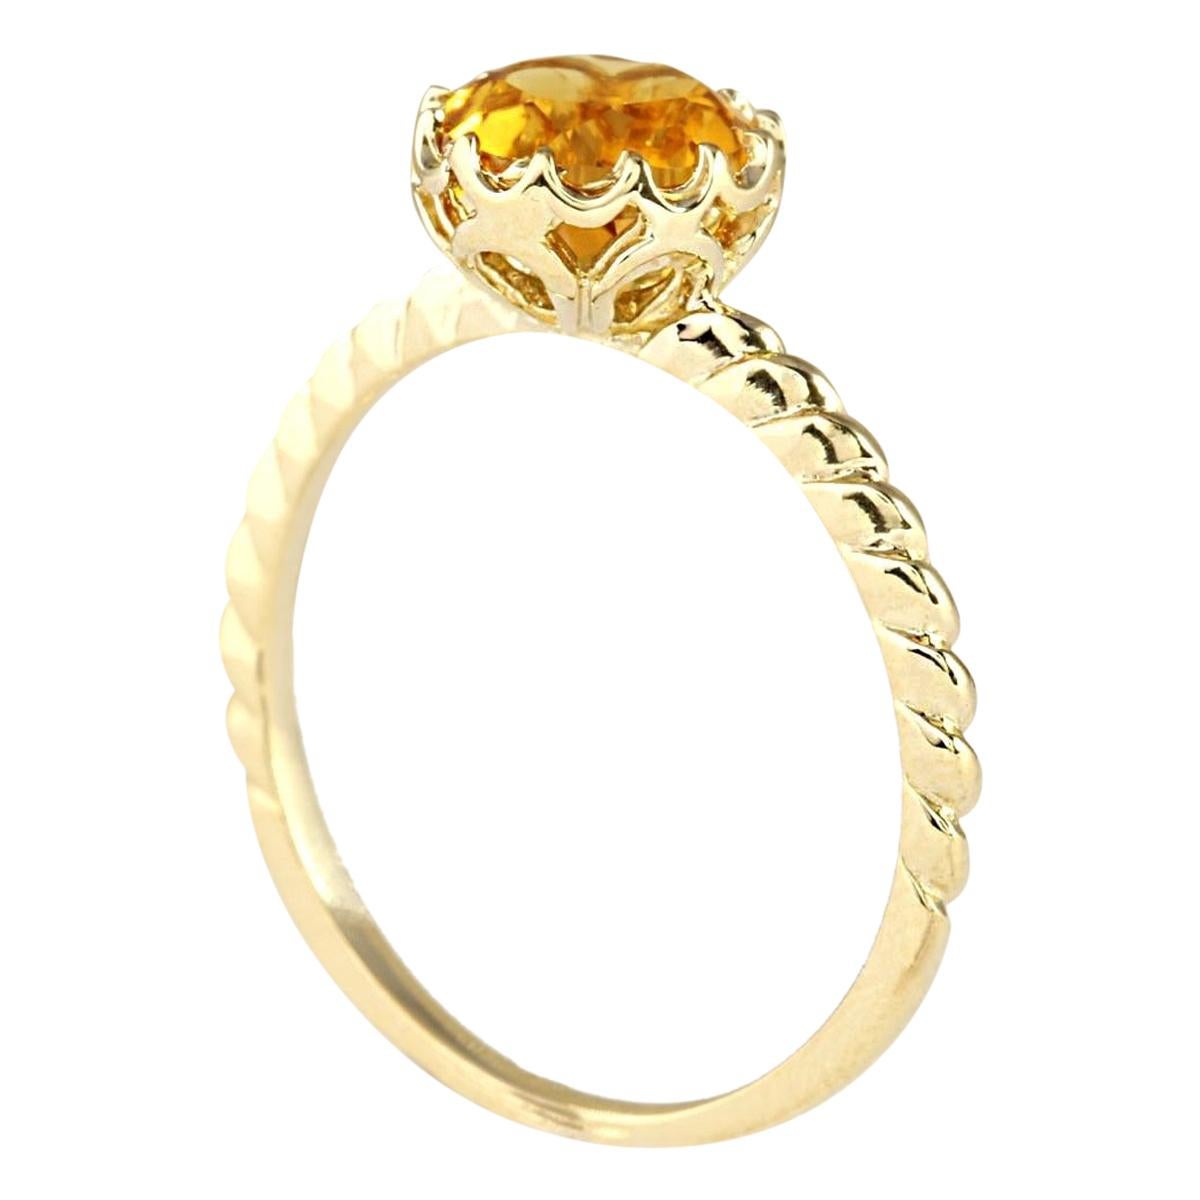 Round Cut Citrine Ring In 14 Karat Yellow Gold For Sale